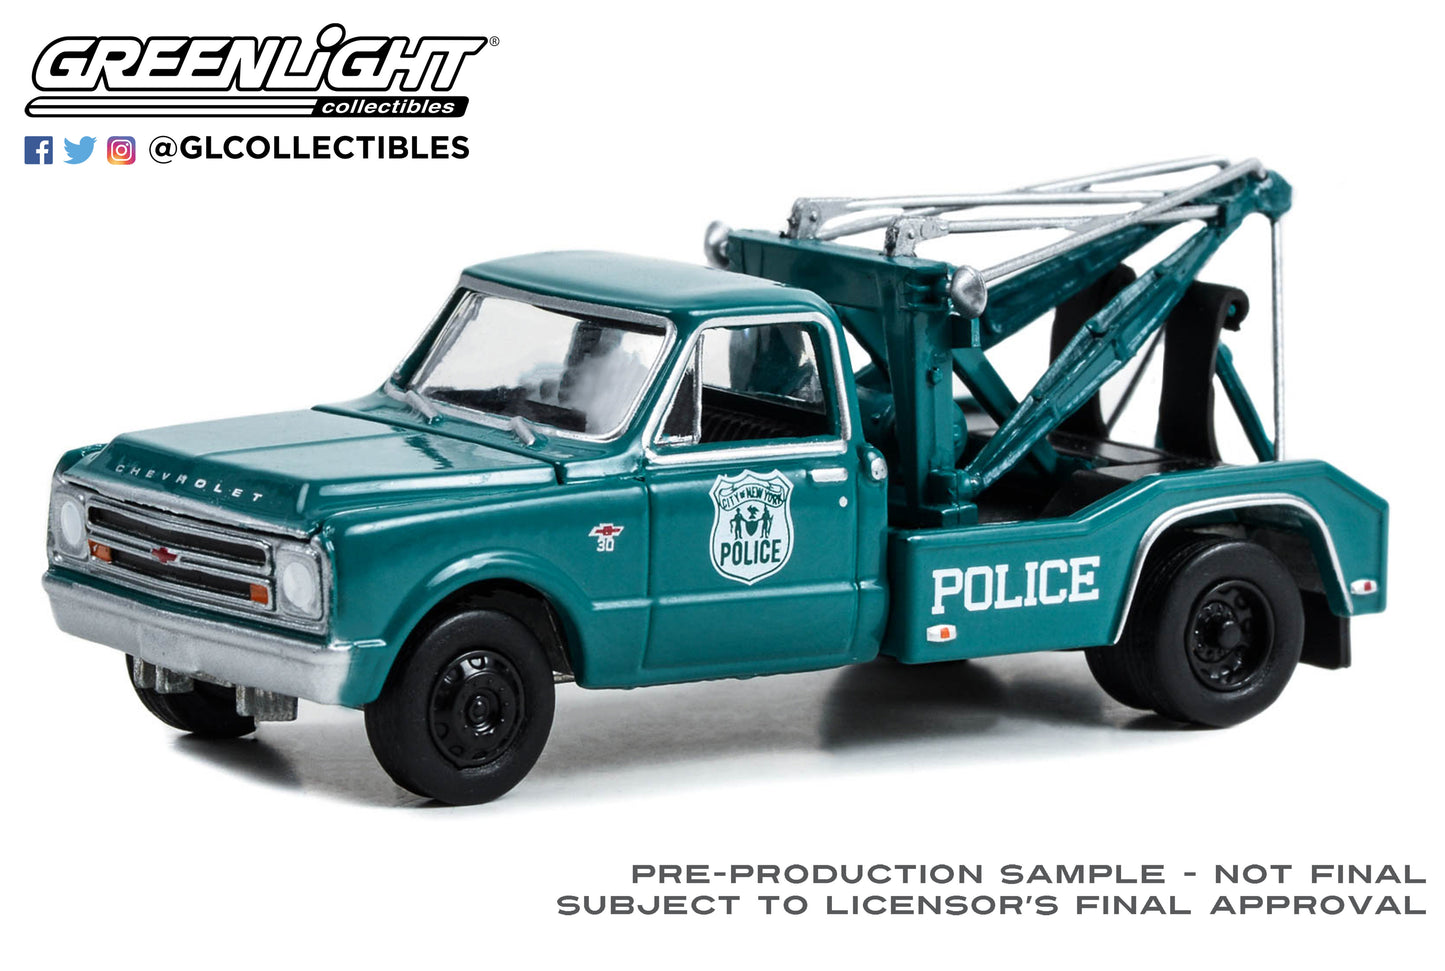 GreenLight 1:64 Dually Drivers Series 12 - 1967 Chevrolet C-30 Dually Wrecker - New York City Police Department (NYPD) 46120-A